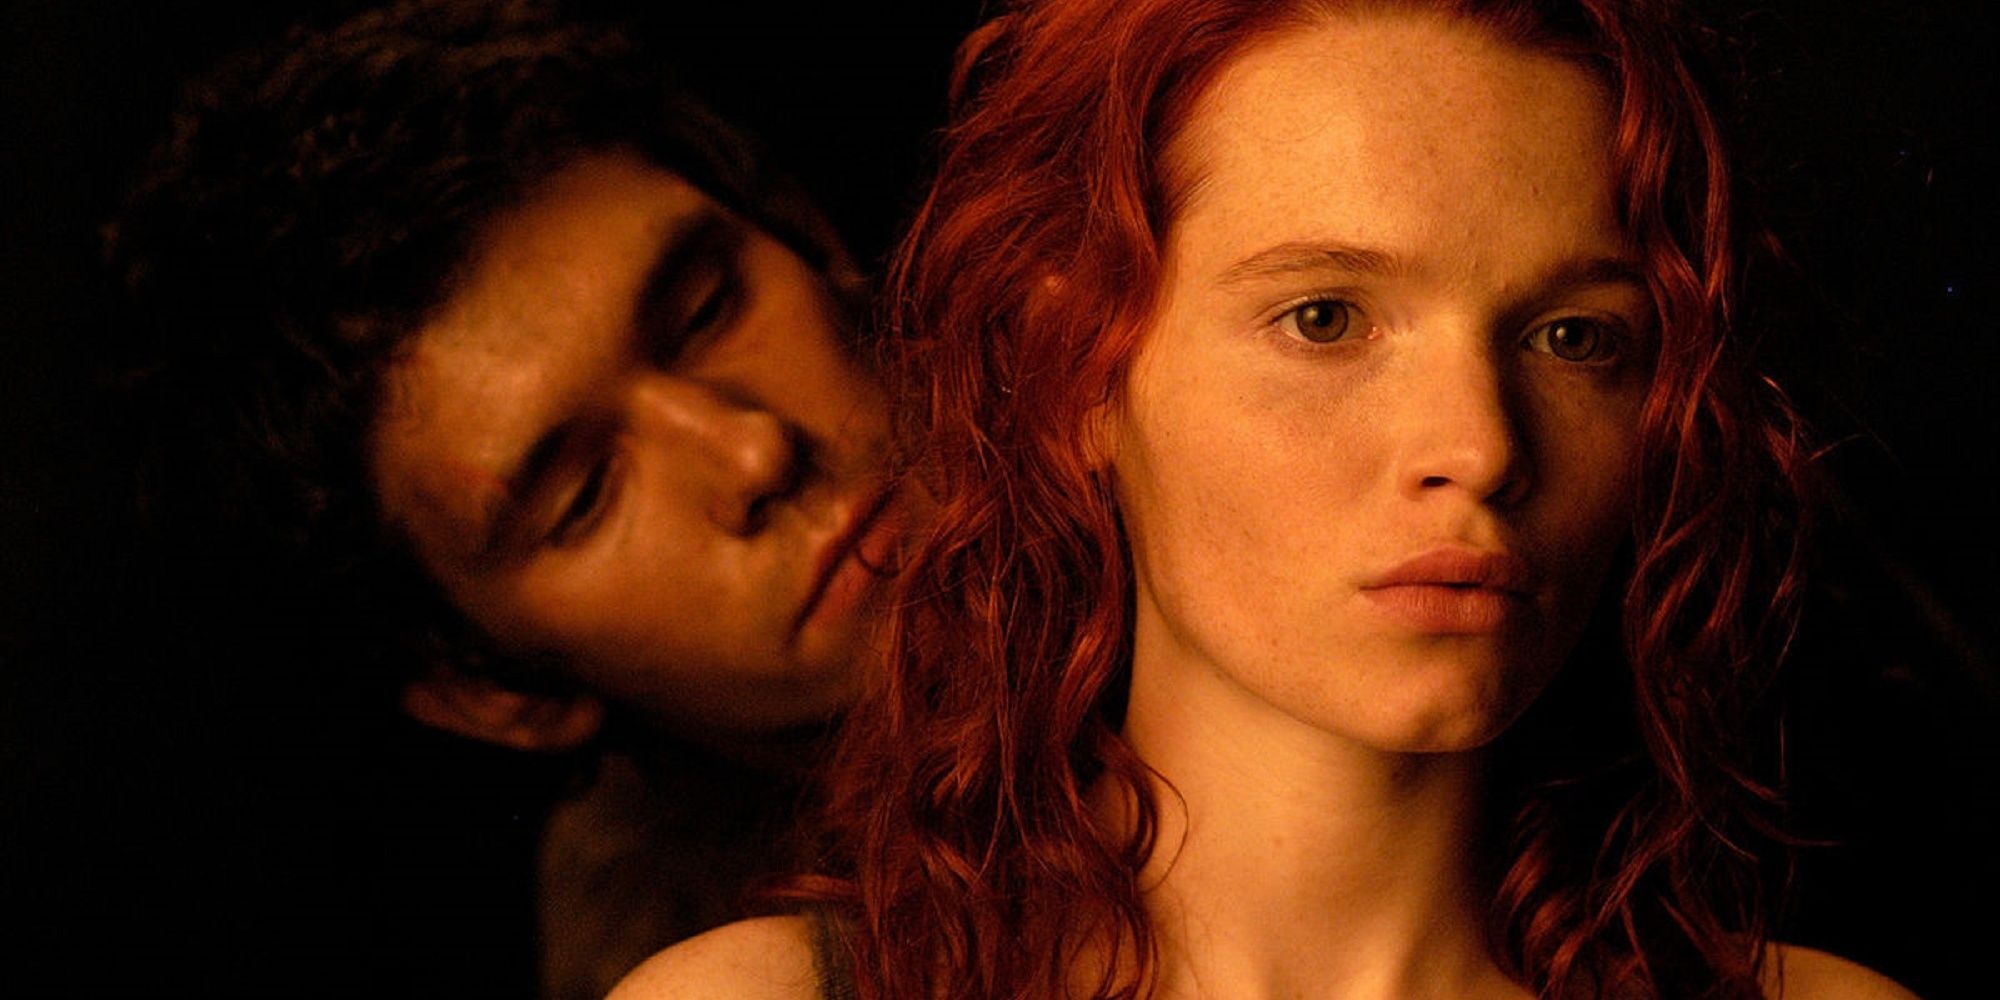 Jean-Baptiste standing behind a young red-headed woman.